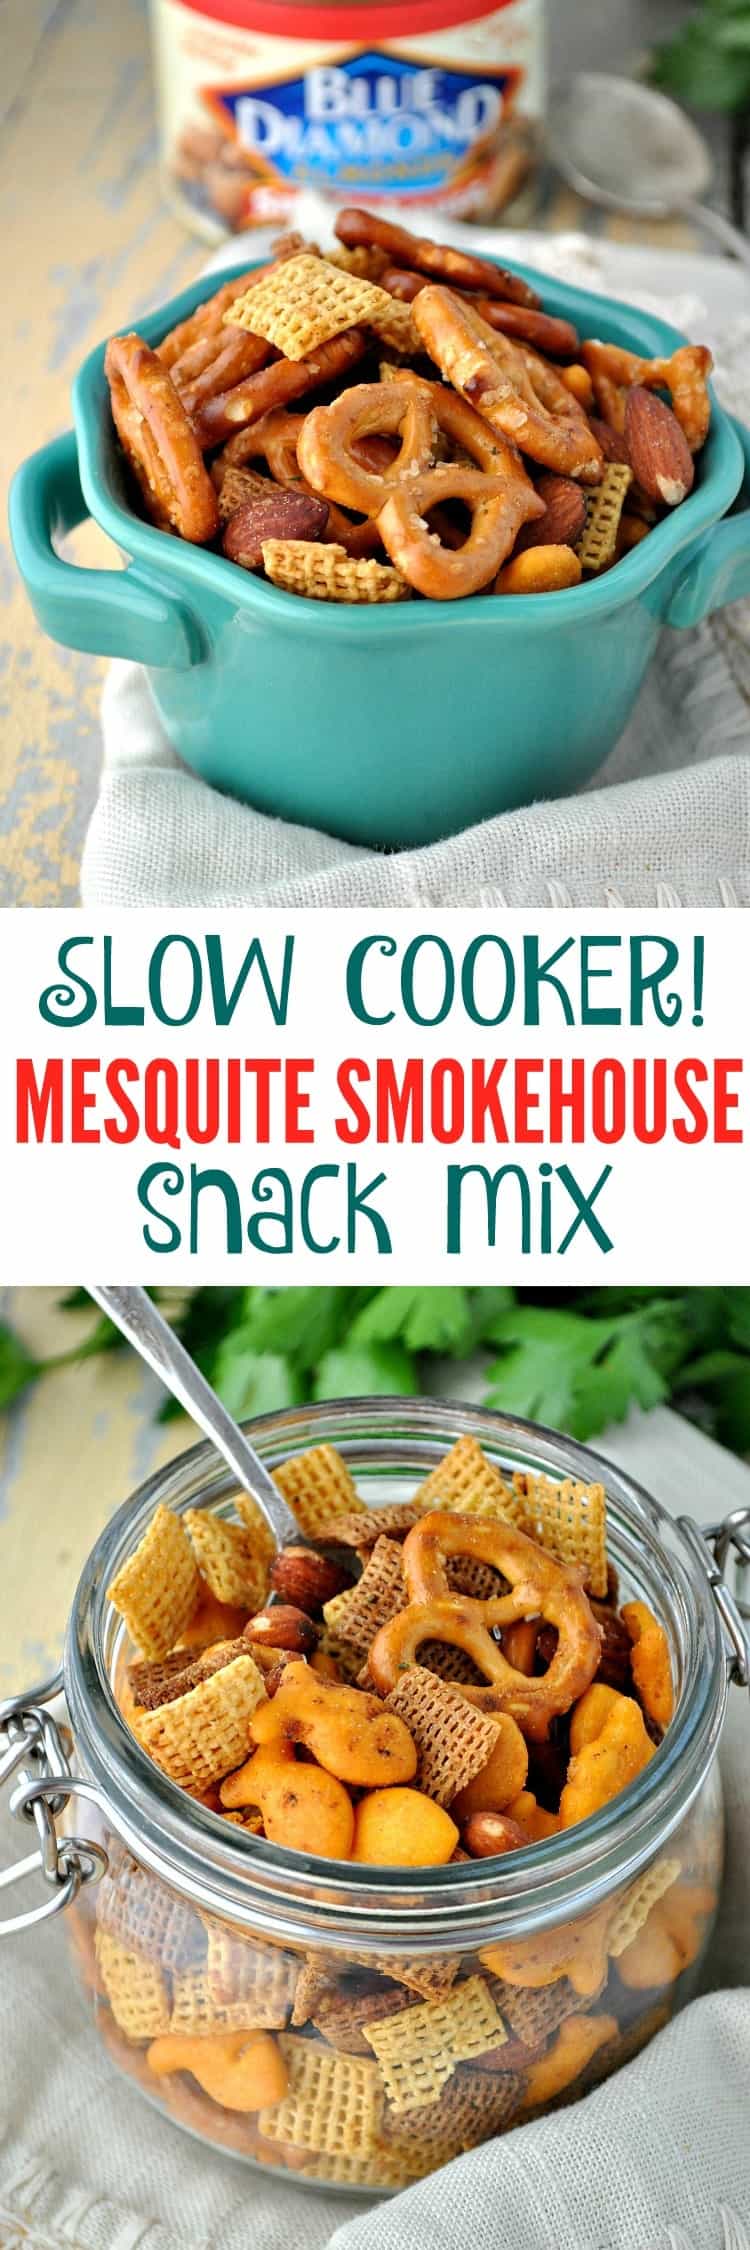 This Slow Cooker Mesquite Smokehouse Snack Mix is a salty, crunchy, and spicy easy appetizer for game day gatherings and festive holiday parties!